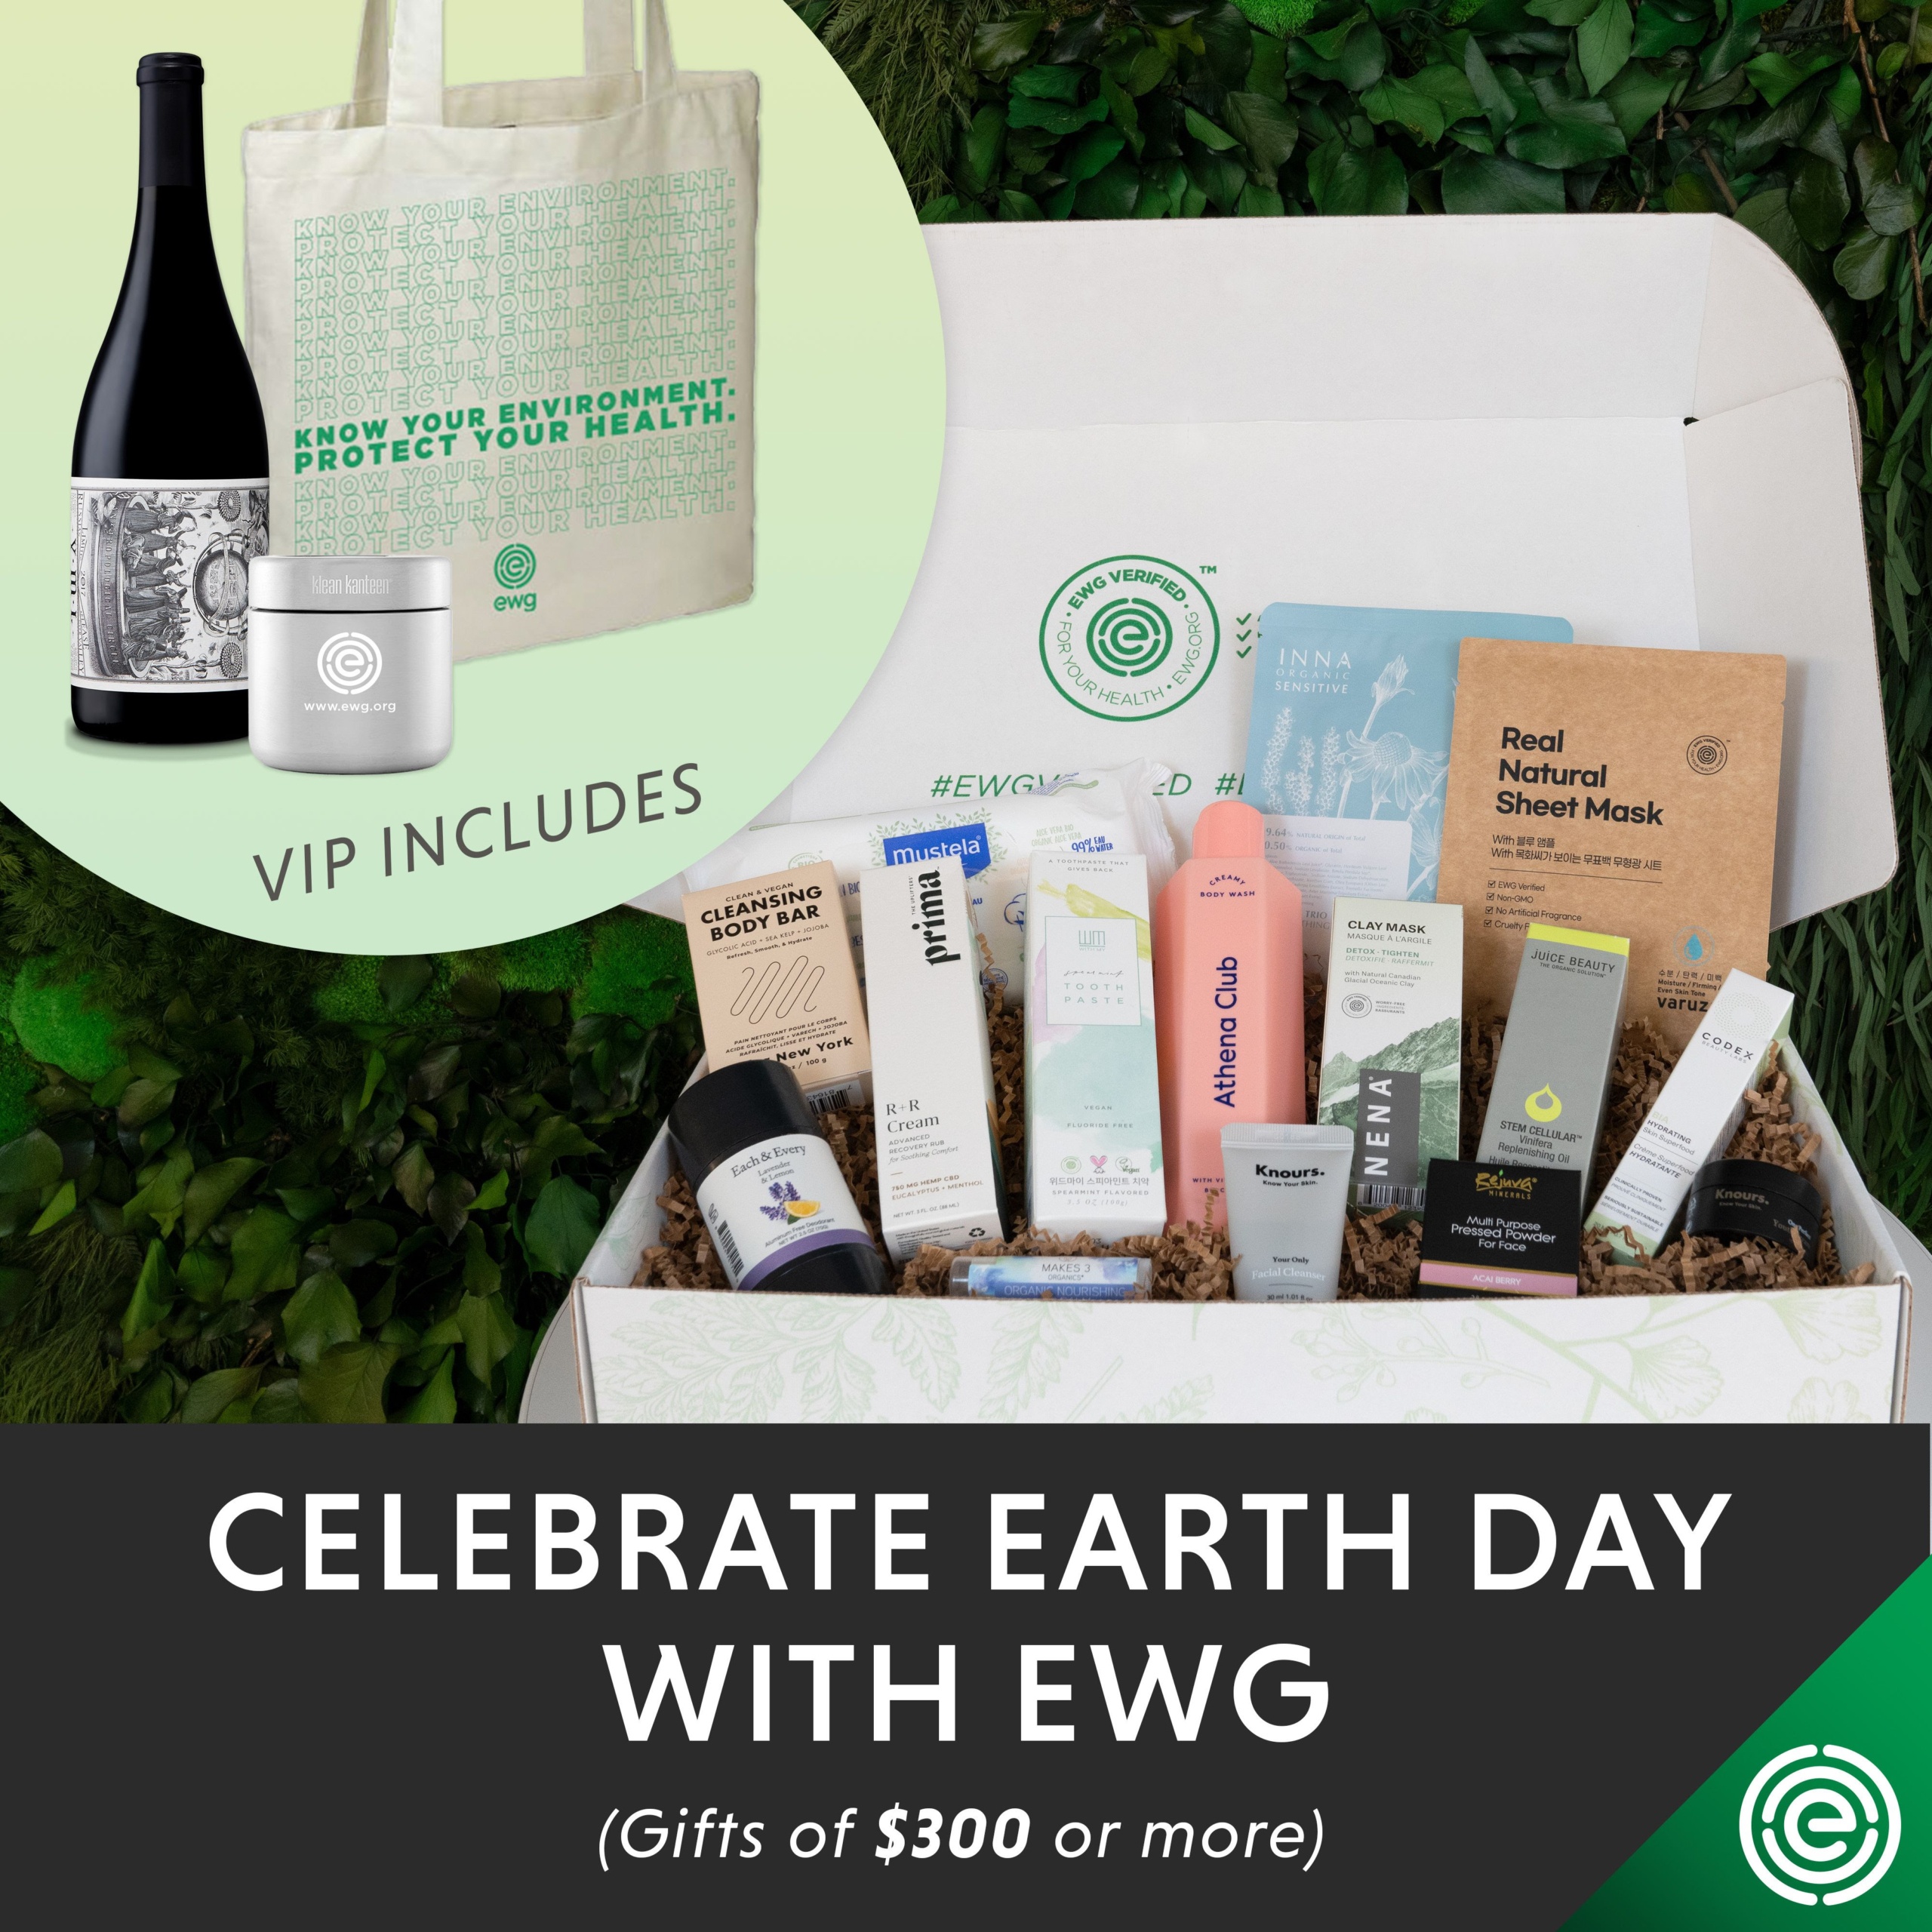 Celebrate Earth Day with EWG and me on April 21!